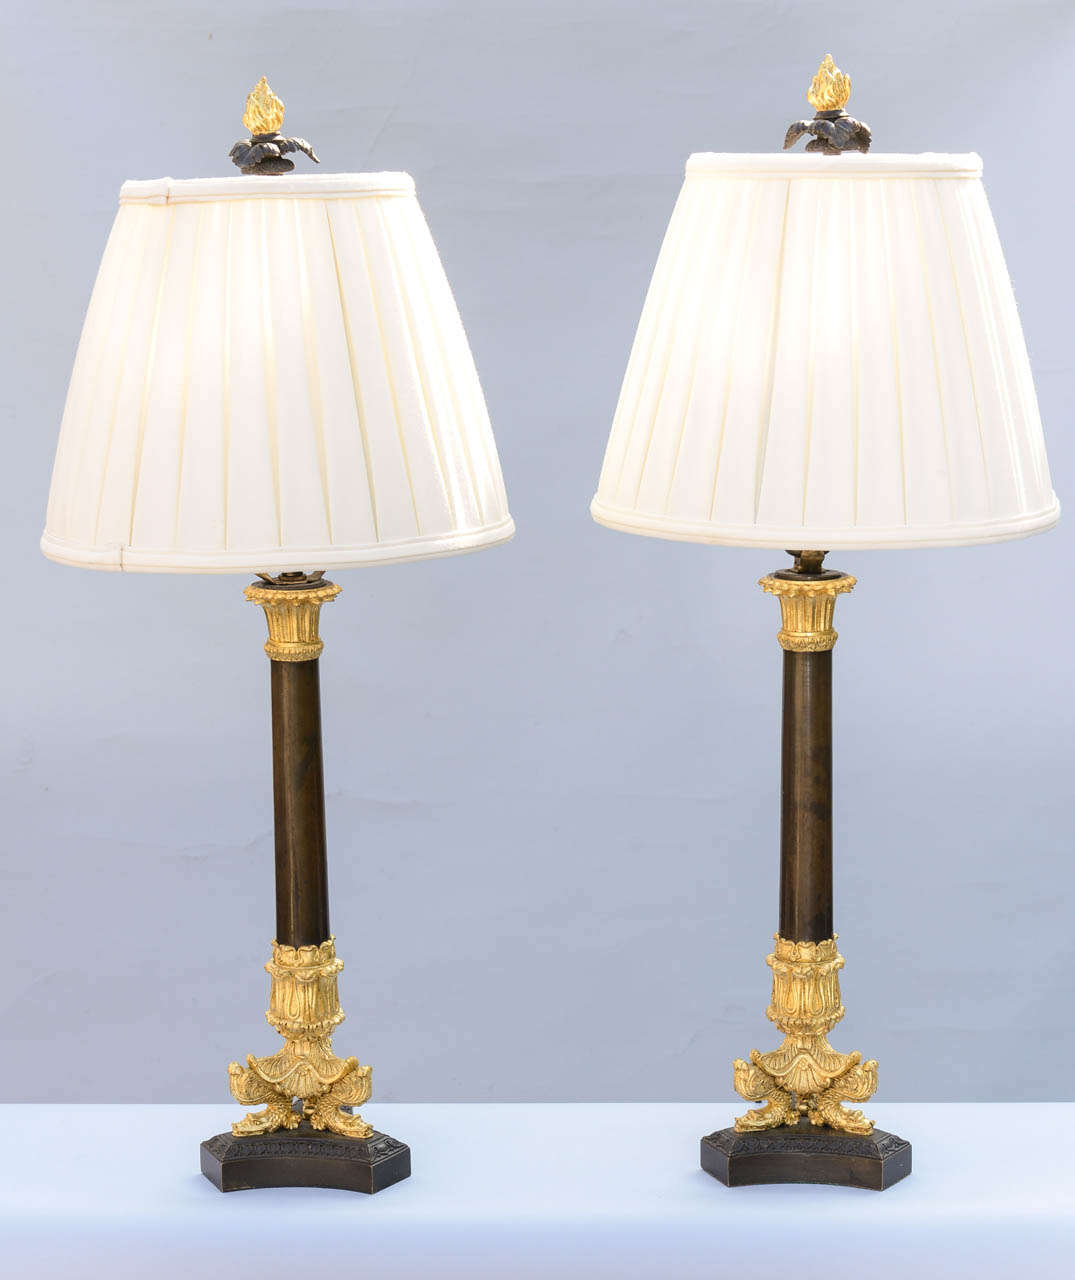 Pair of lamps, having patinated bronze column with dore bronze acanthus capital, raised on tripartite base of dolphins, finished with period gilt bronze finial. Shown with pleated shades.